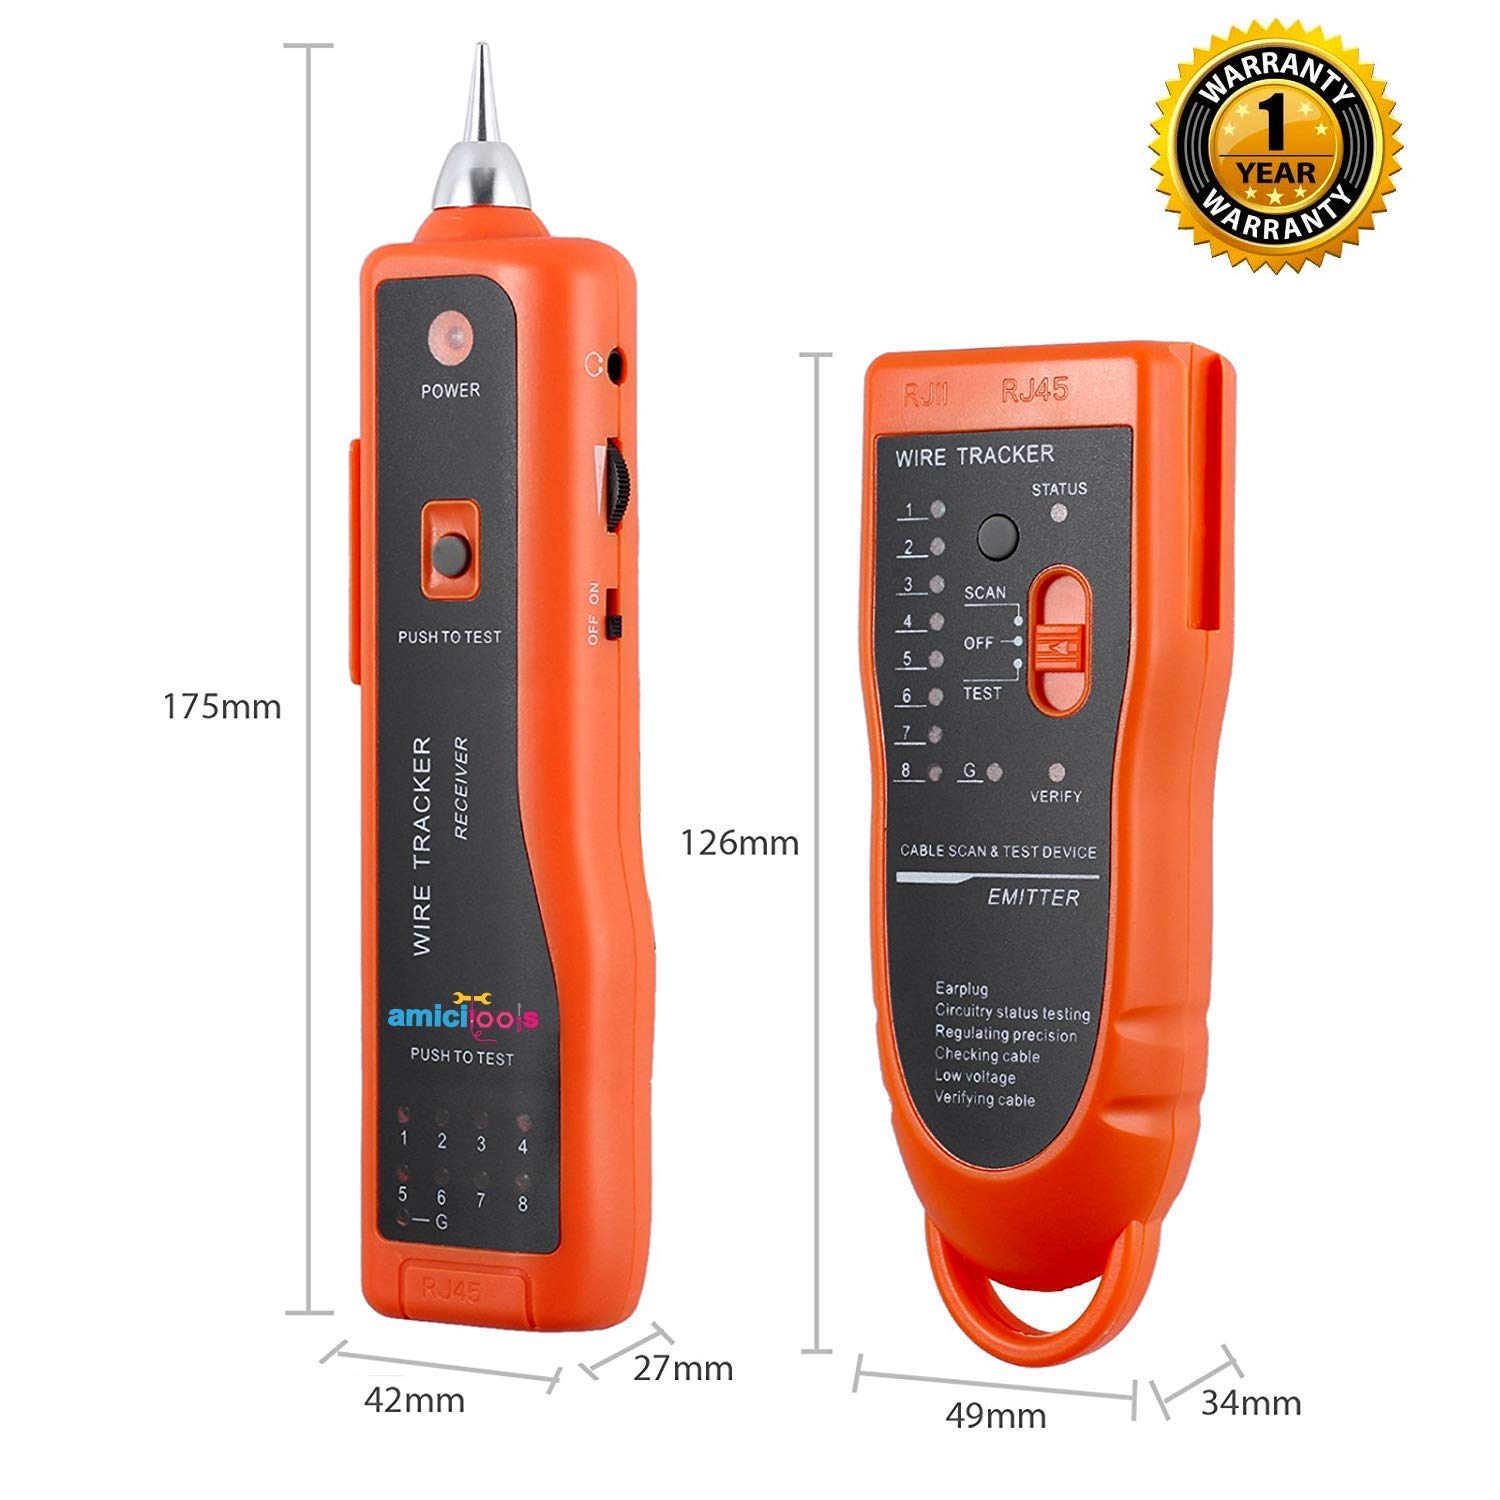 Network Cable Tester, Wire Tracker - Premium (with 9V Battery)